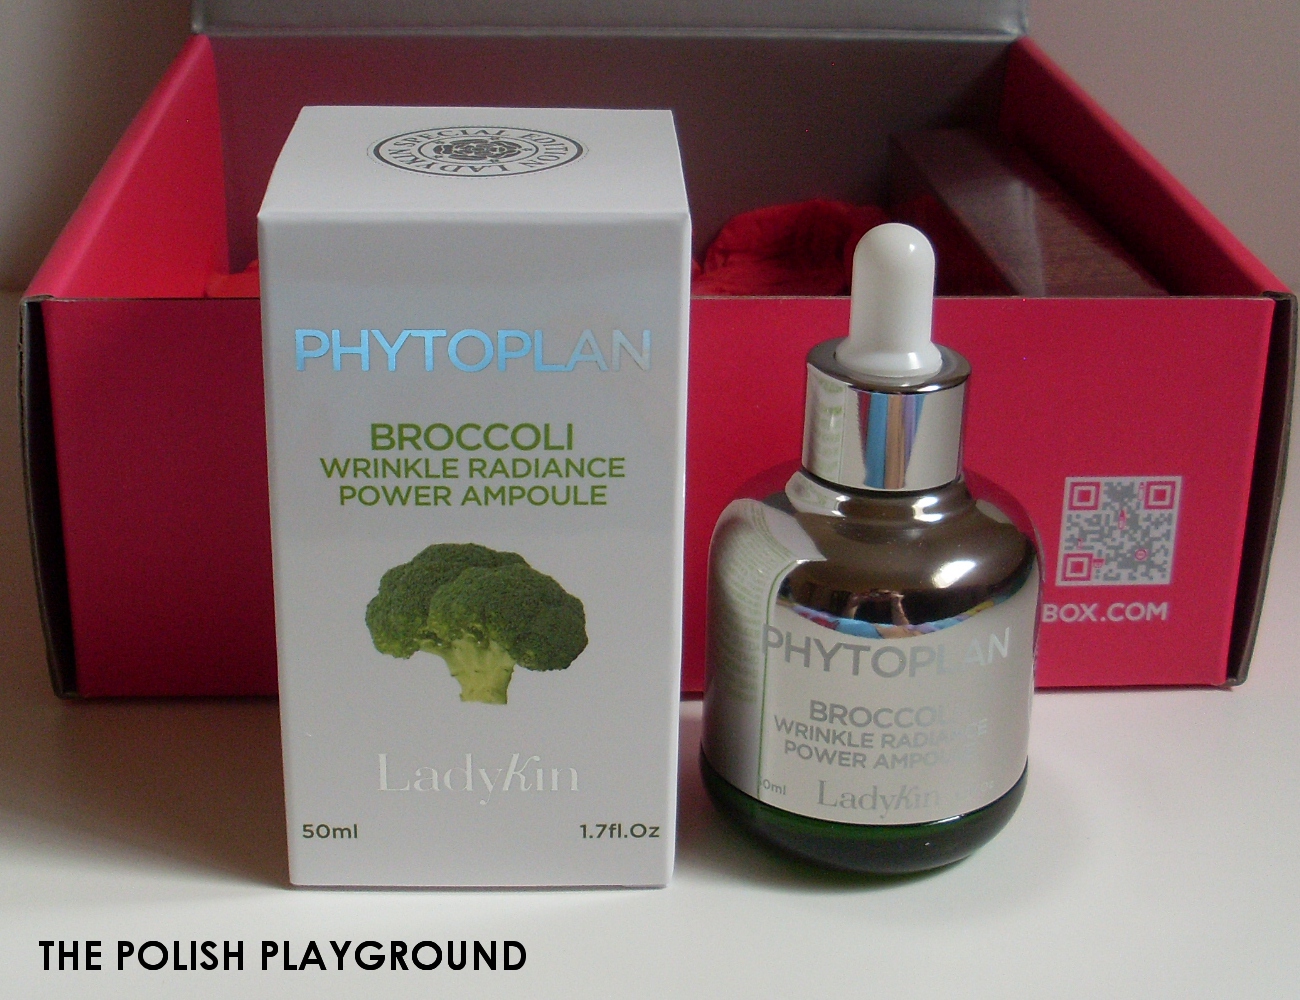 Memebox Special #20 Superfood Unboxing - LadyKin Phytopian Broccoli Wrinkle Radiance Power Ampoule